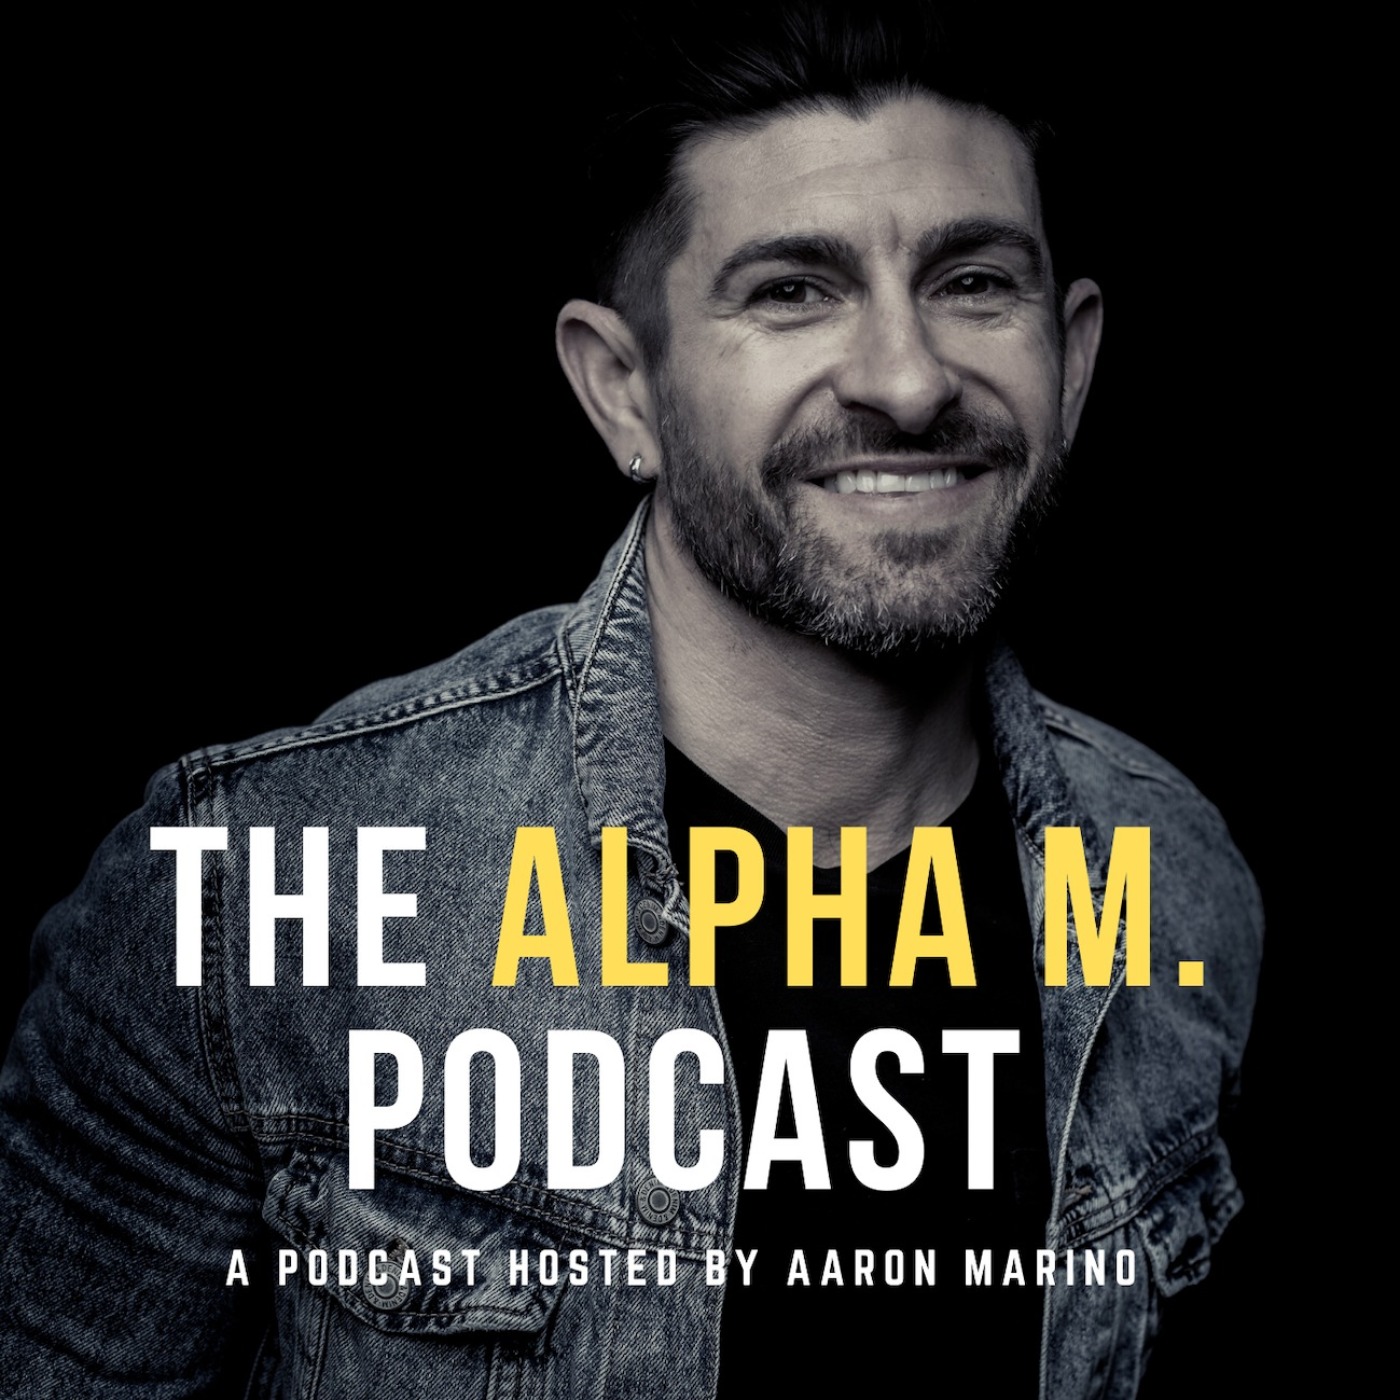 The Alpha M. Podcast